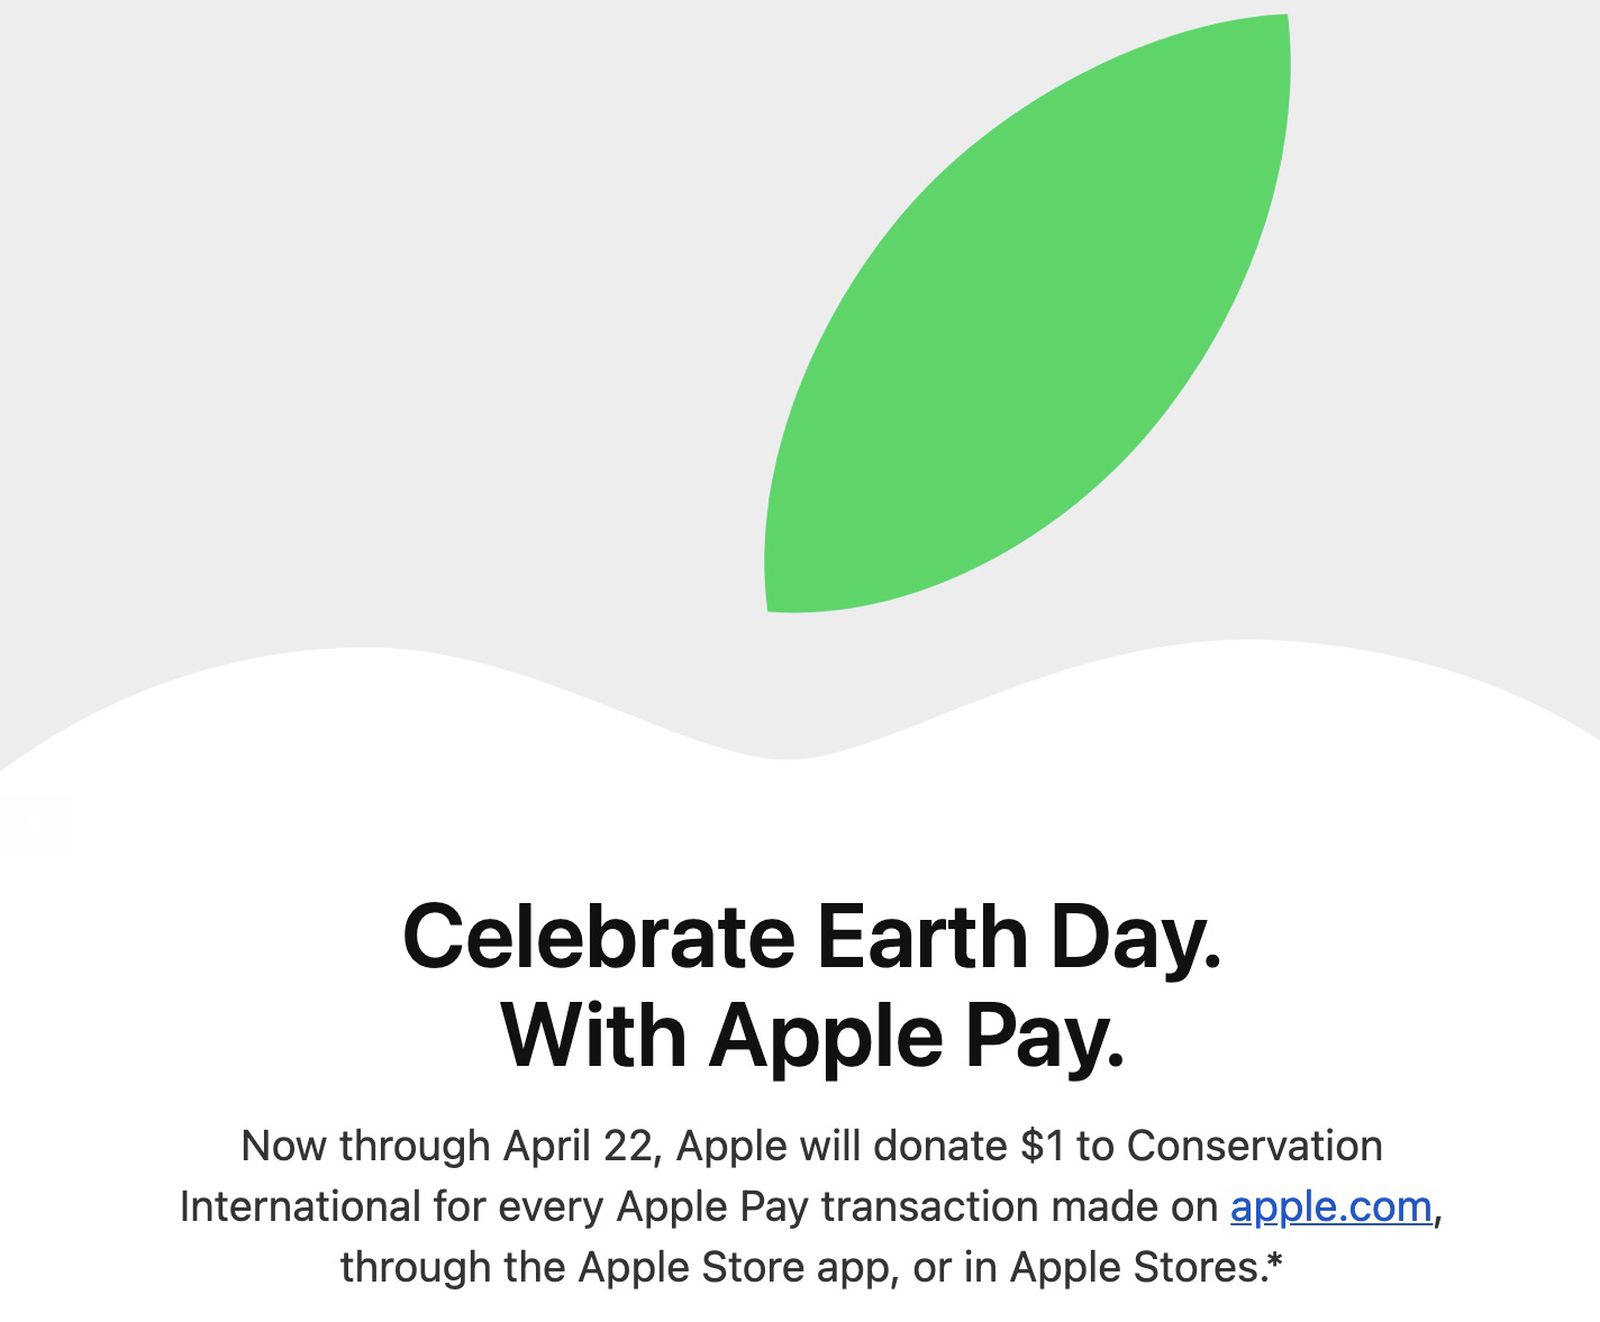 Apple Pay in Earth day